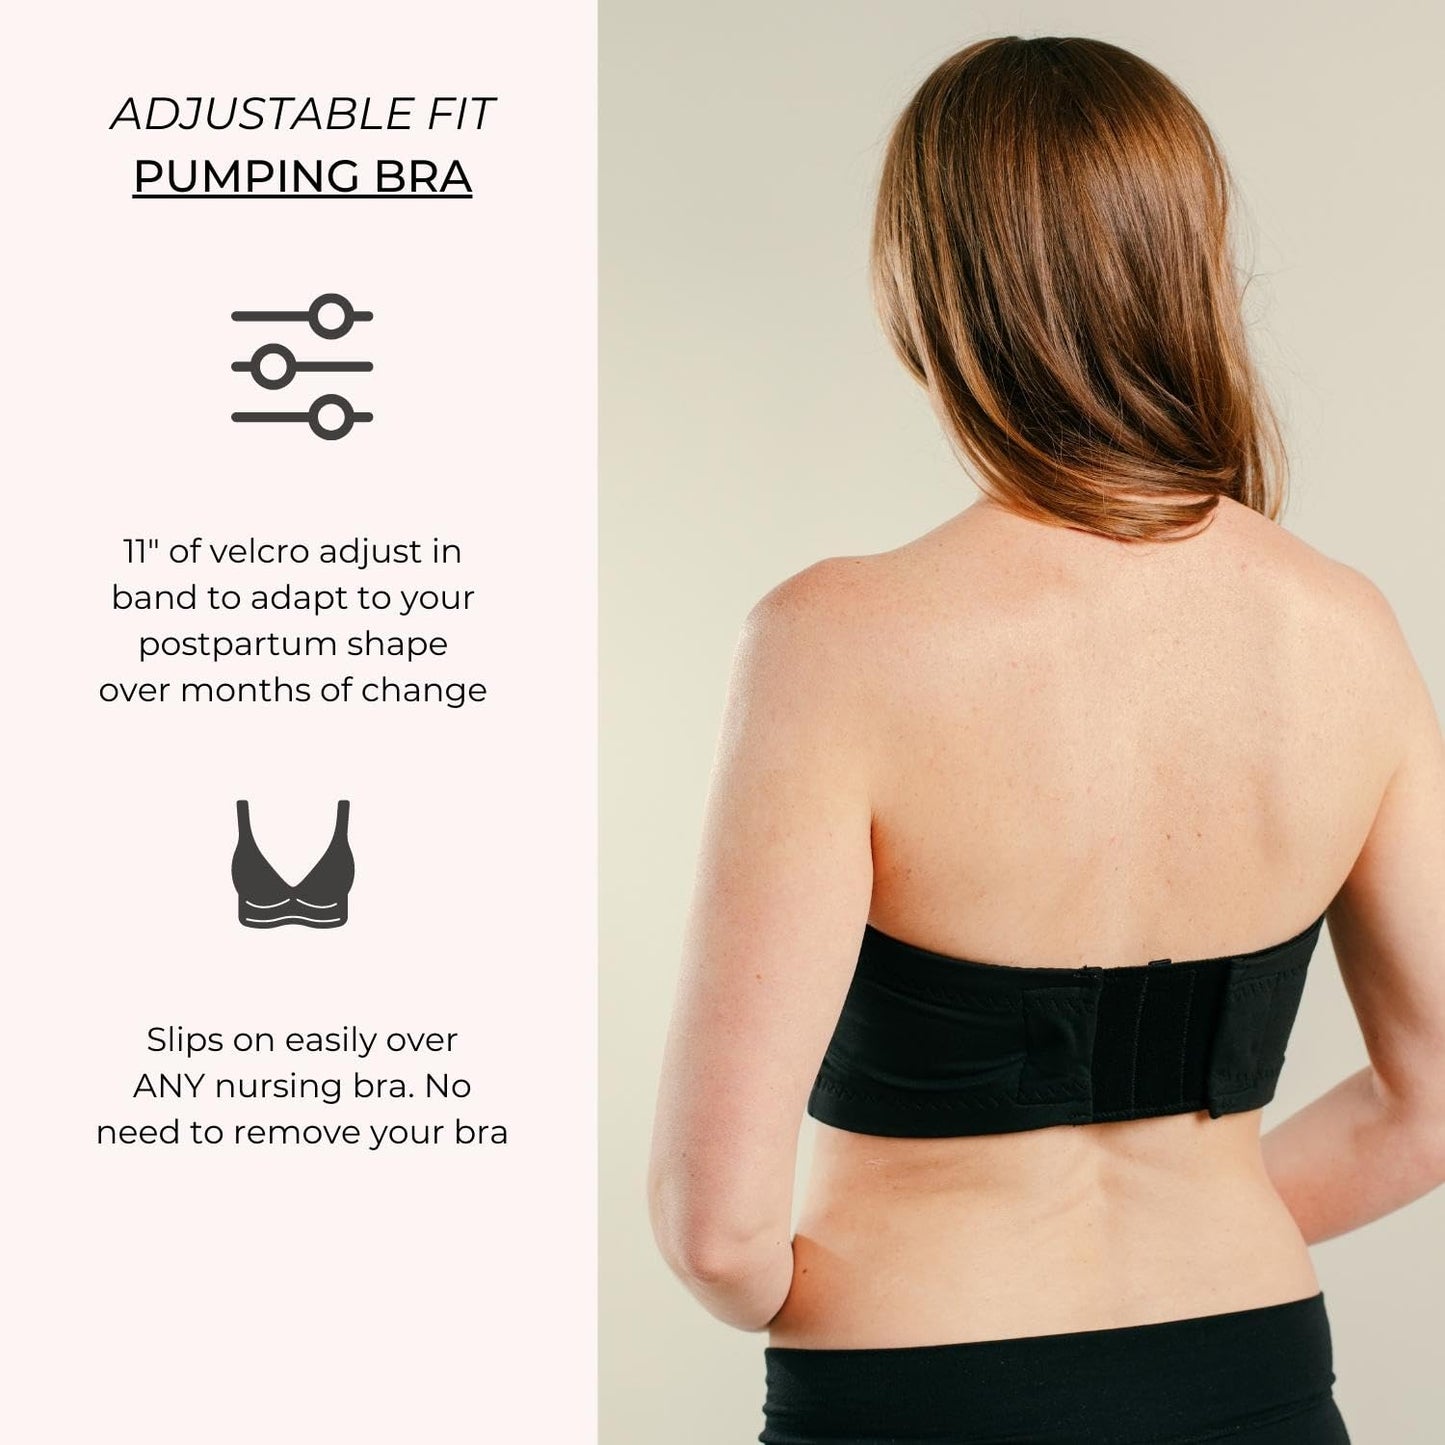 Simple Wishes Signature Hands Free Pumping Bra, Patented, Black, X-Small/Large